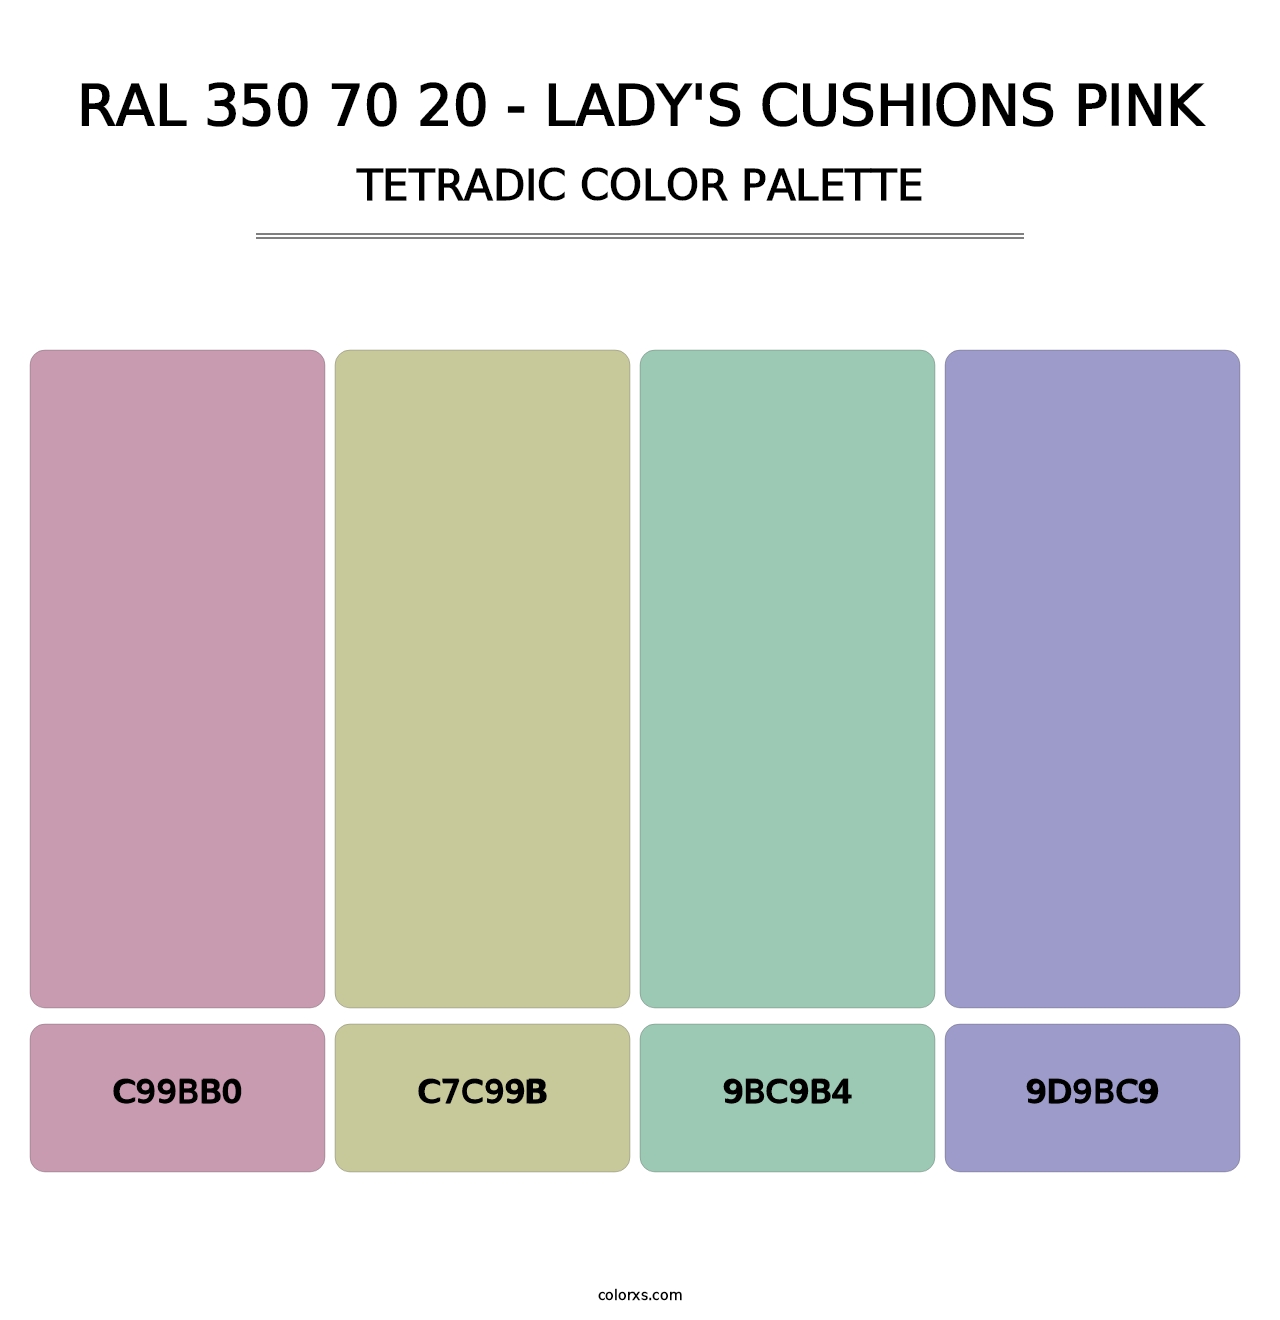 RAL 350 70 20 - Lady's Cushions Pink - Tetradic Color Palette